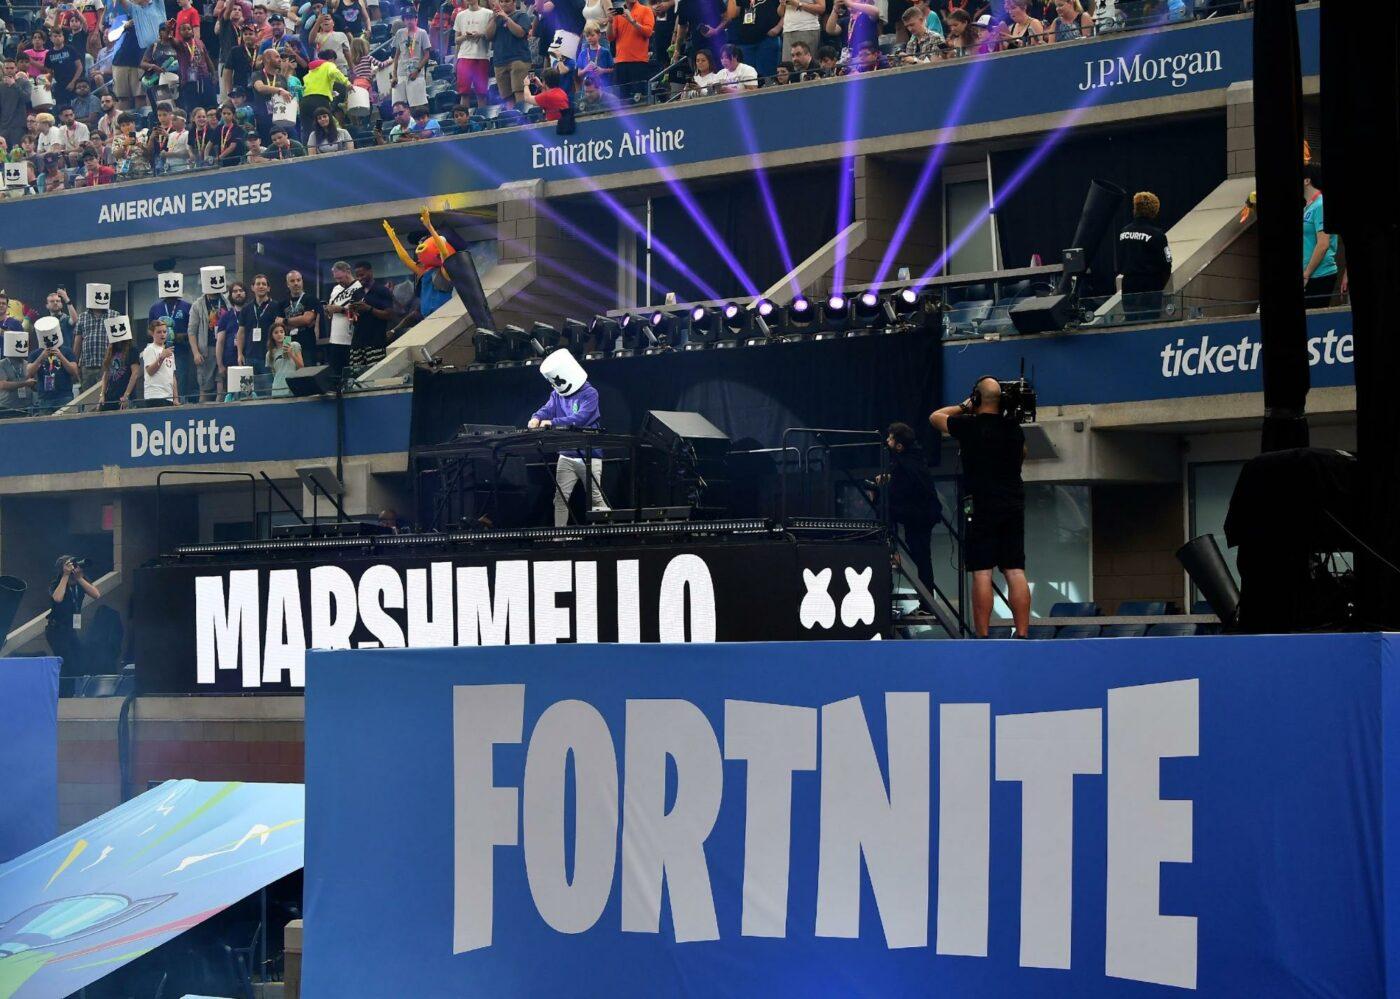 Marshmello performing at an event